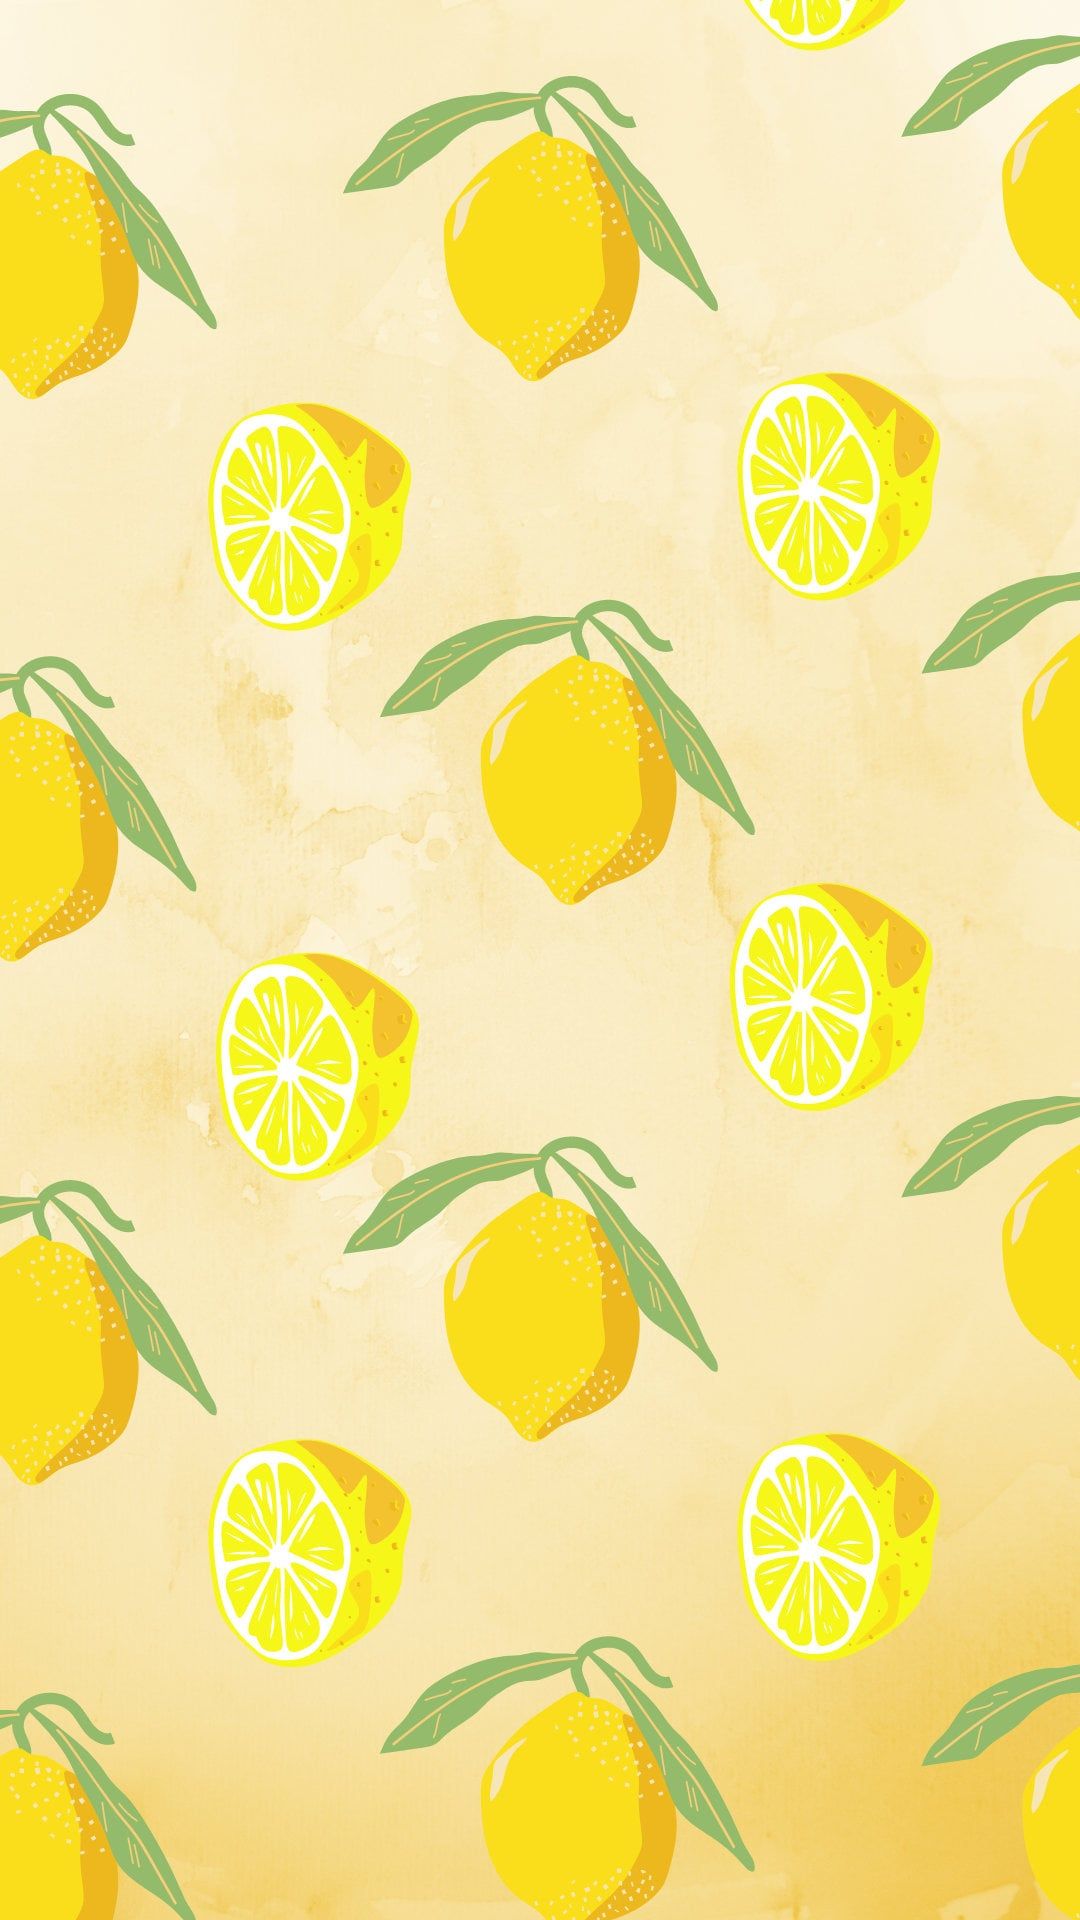 A wallpaper of lemons with leaves on a yellow background - Lemon